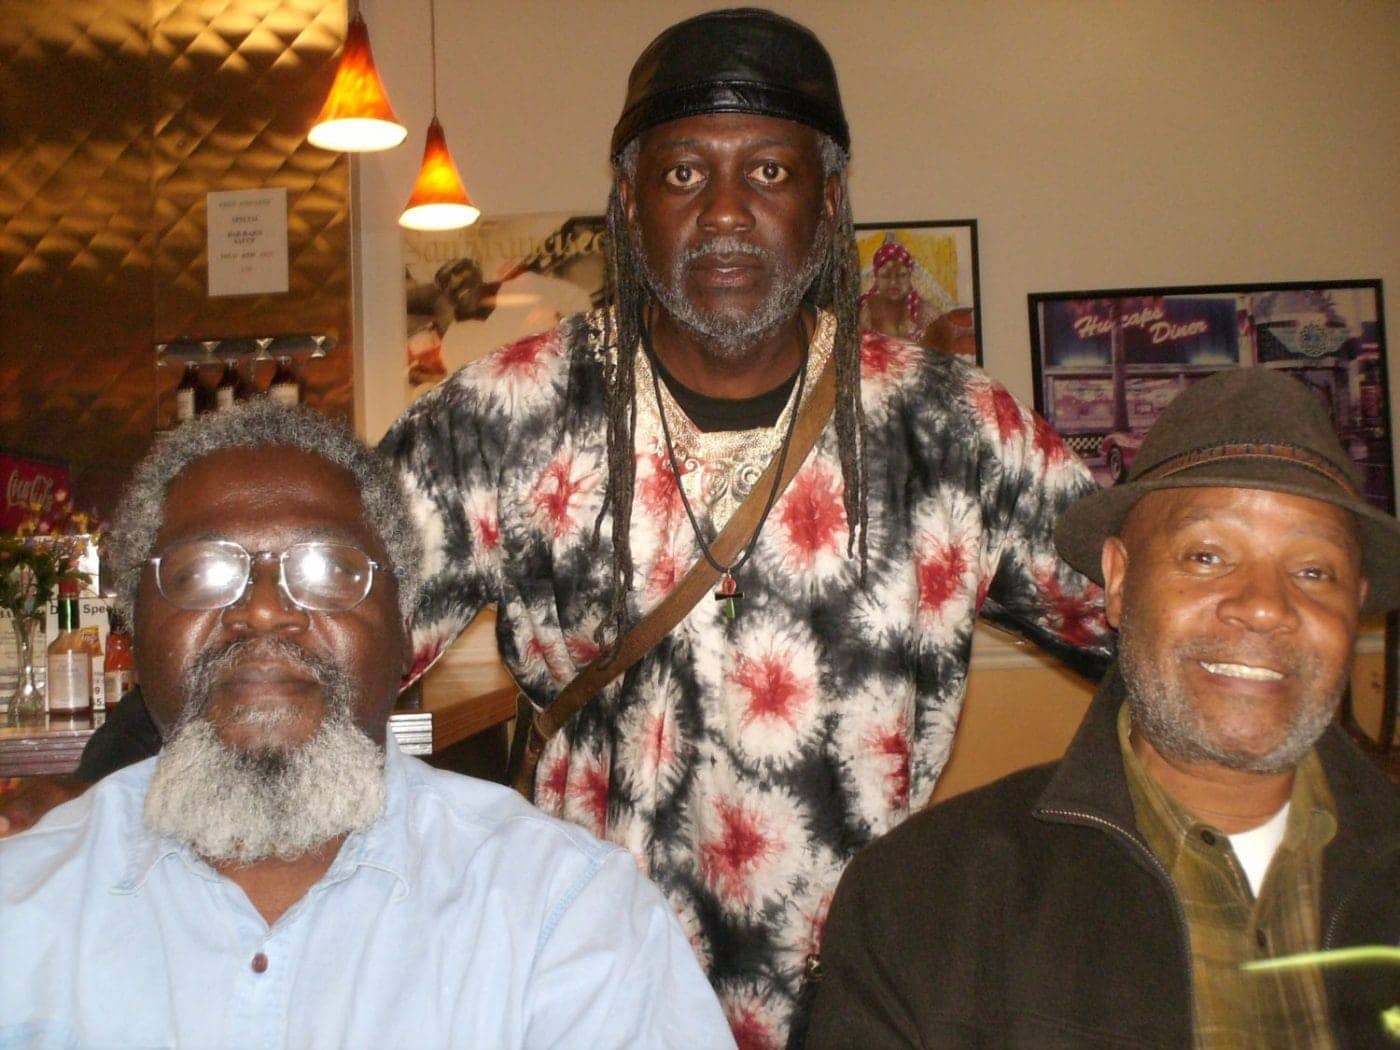 Jahahara-with-Emory-Douglas-and-Shaka-At-Thinnin-0522-1400x1050, Sign our Reparations petition, support Pamela and Chesa for DA in Alameda and SF counties!, Culture Currents Local News & Views News & Views 